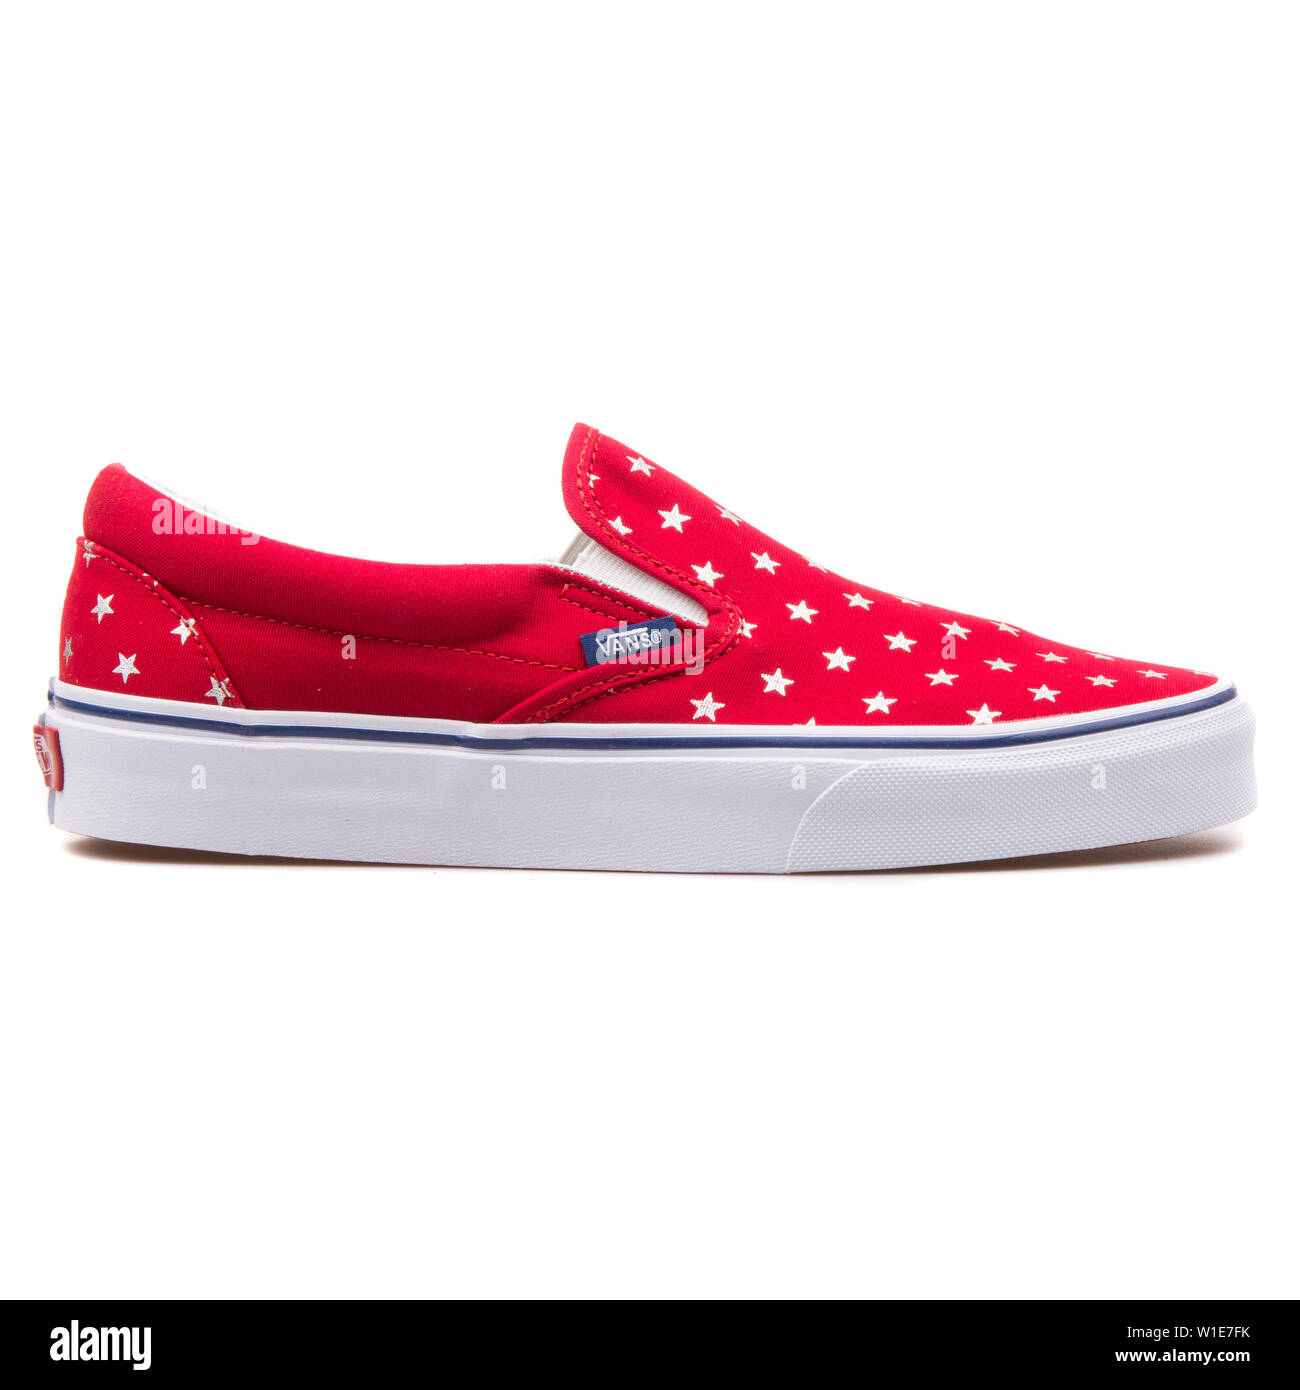 VIENNA, AUSTRIA - AUGUST 25, 2017: Vans Classic Slip On red and white stars  sneaker on white background Stock Photo - Alamy